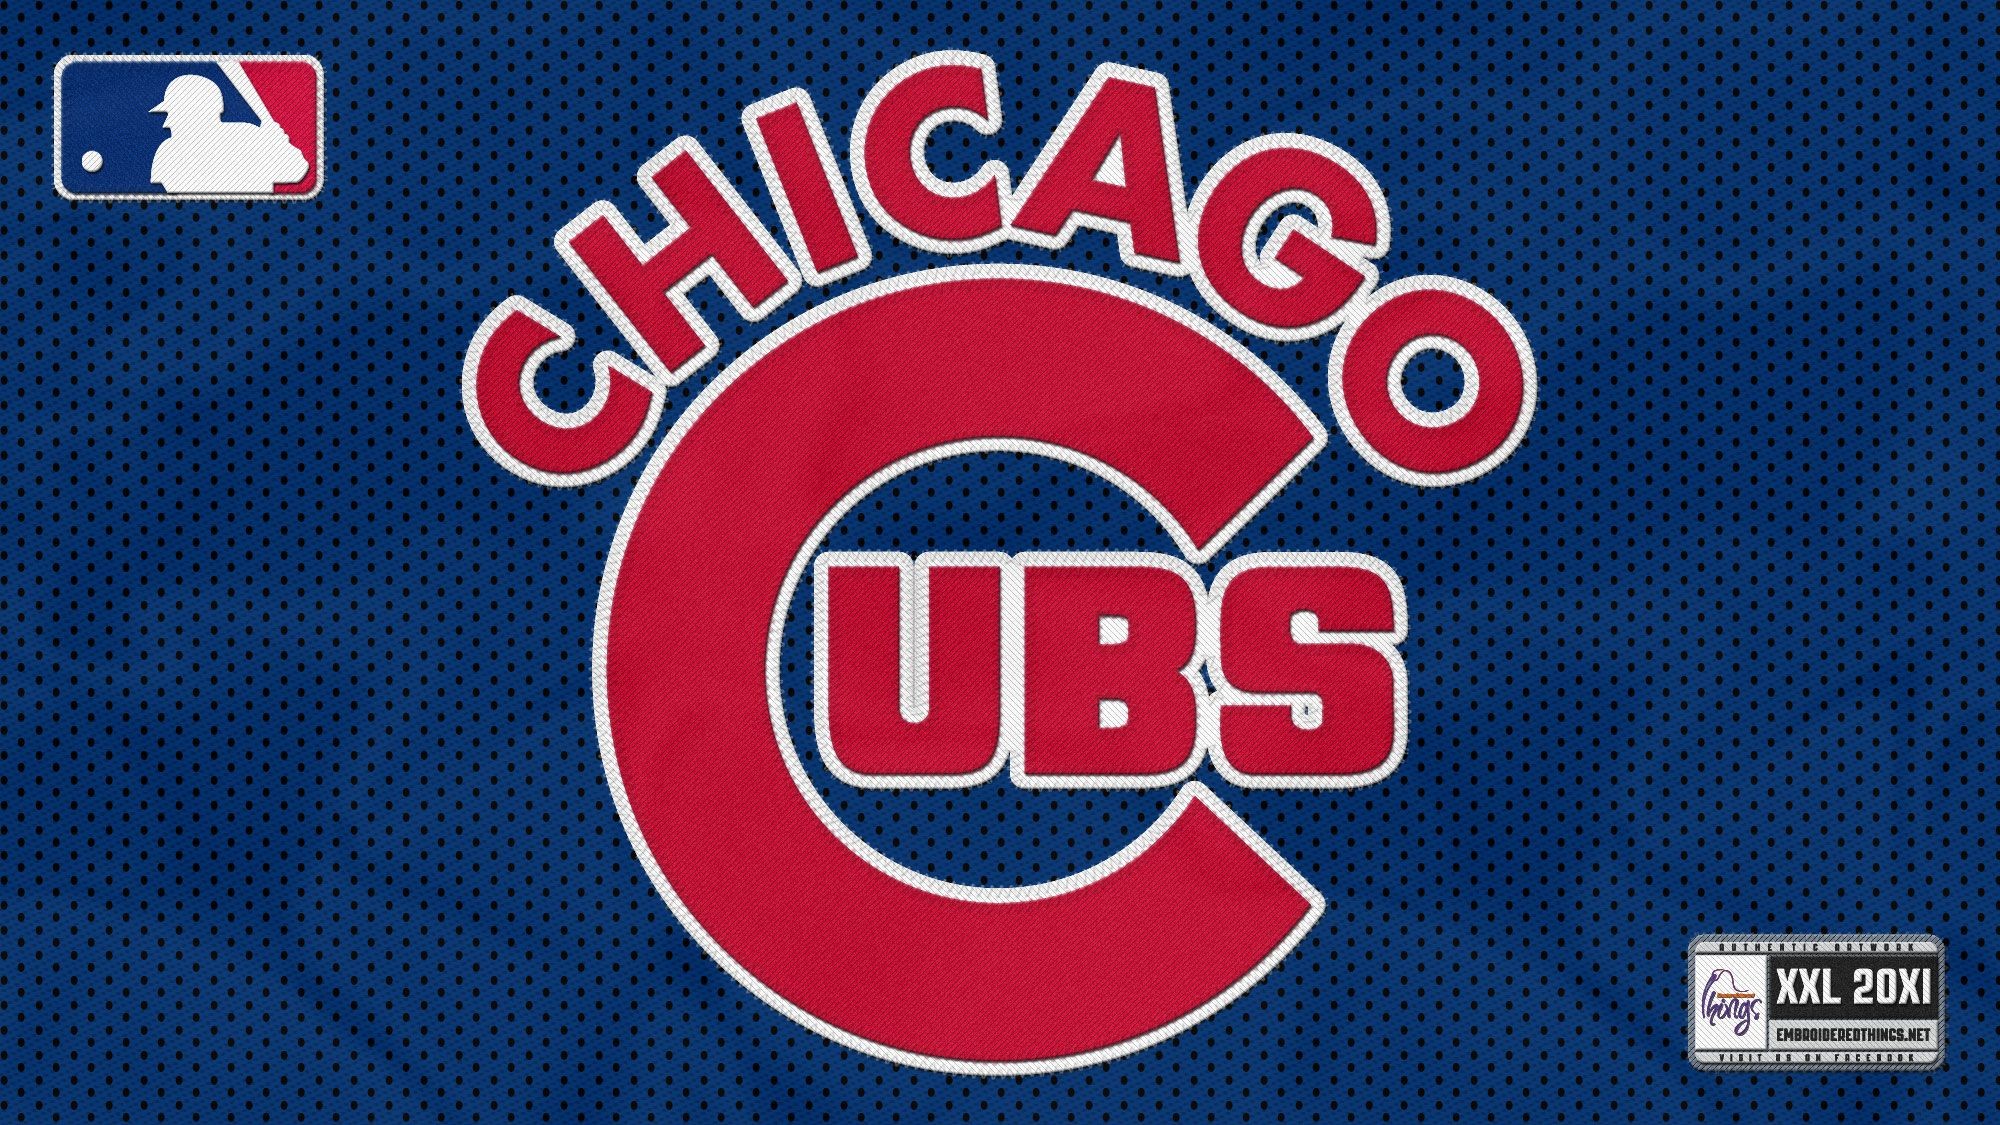 Chicago Cubs Screensavers Pictures, Images & Photos .